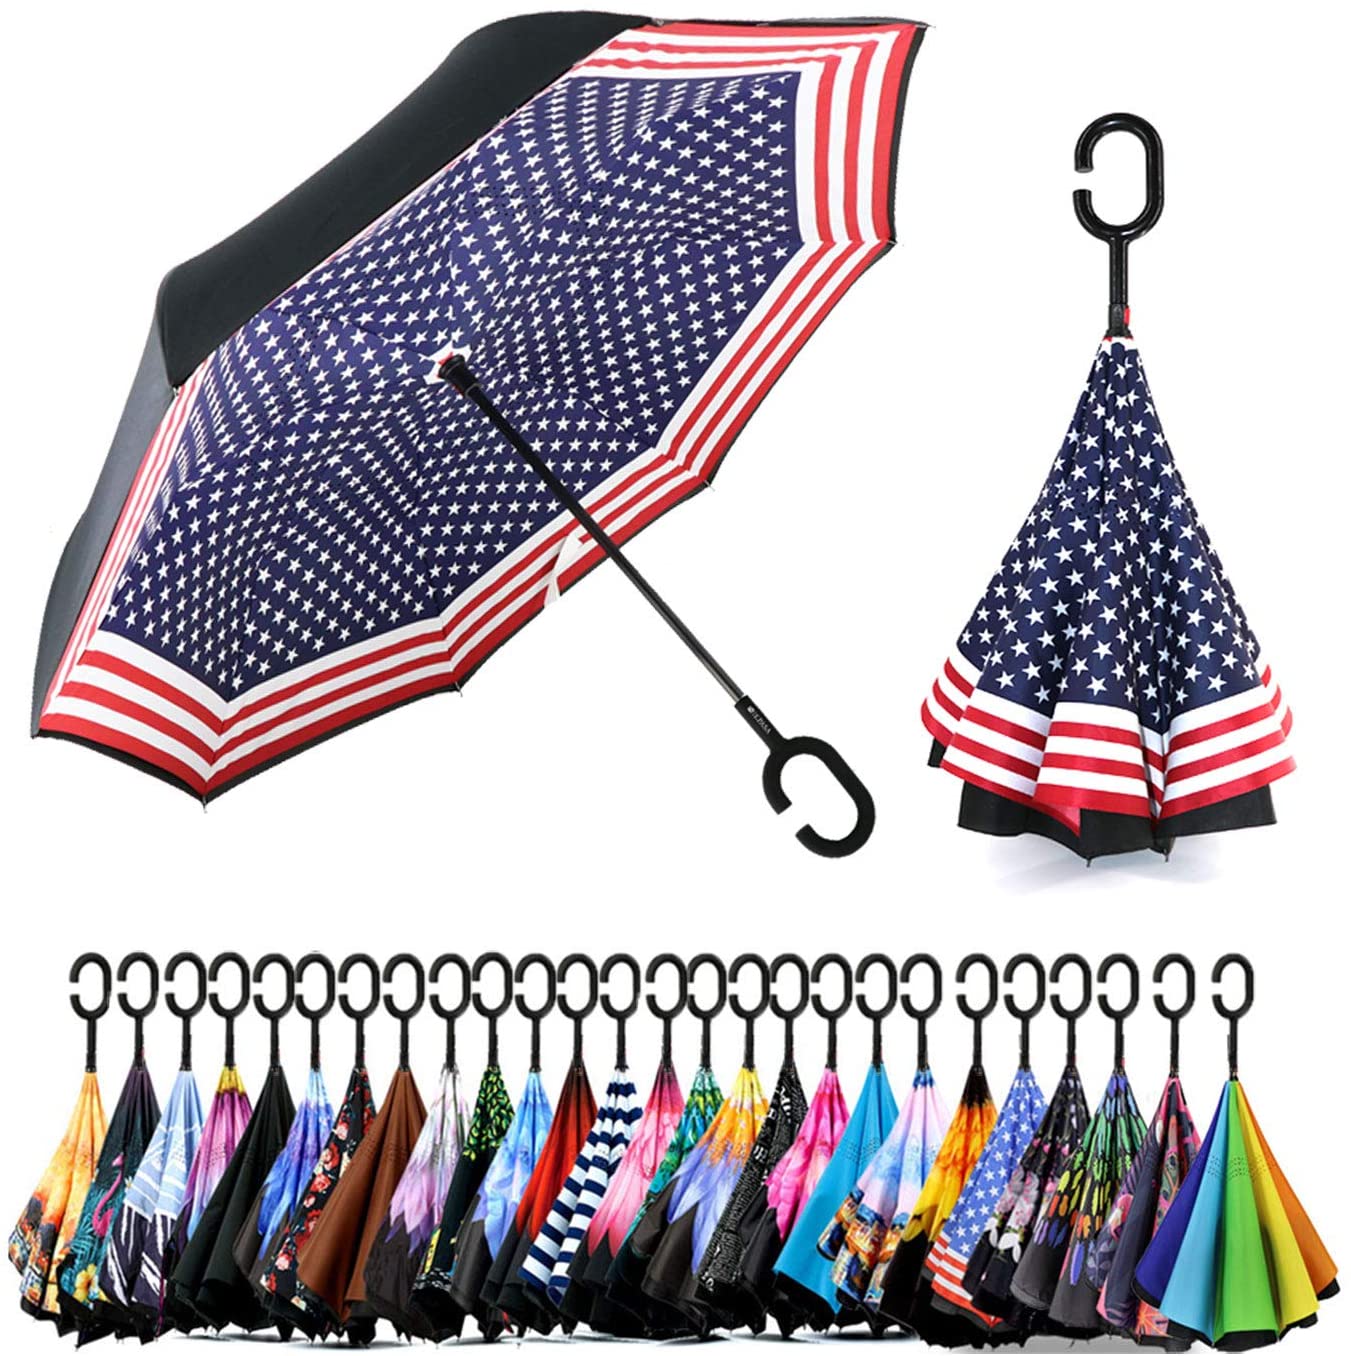 Anti-UV Waterproof Windproof Straight Umbrella for Car Rain Outdoor Use Spar Saa Double Layer Inverted Umbrella with C-Shaped Handle 